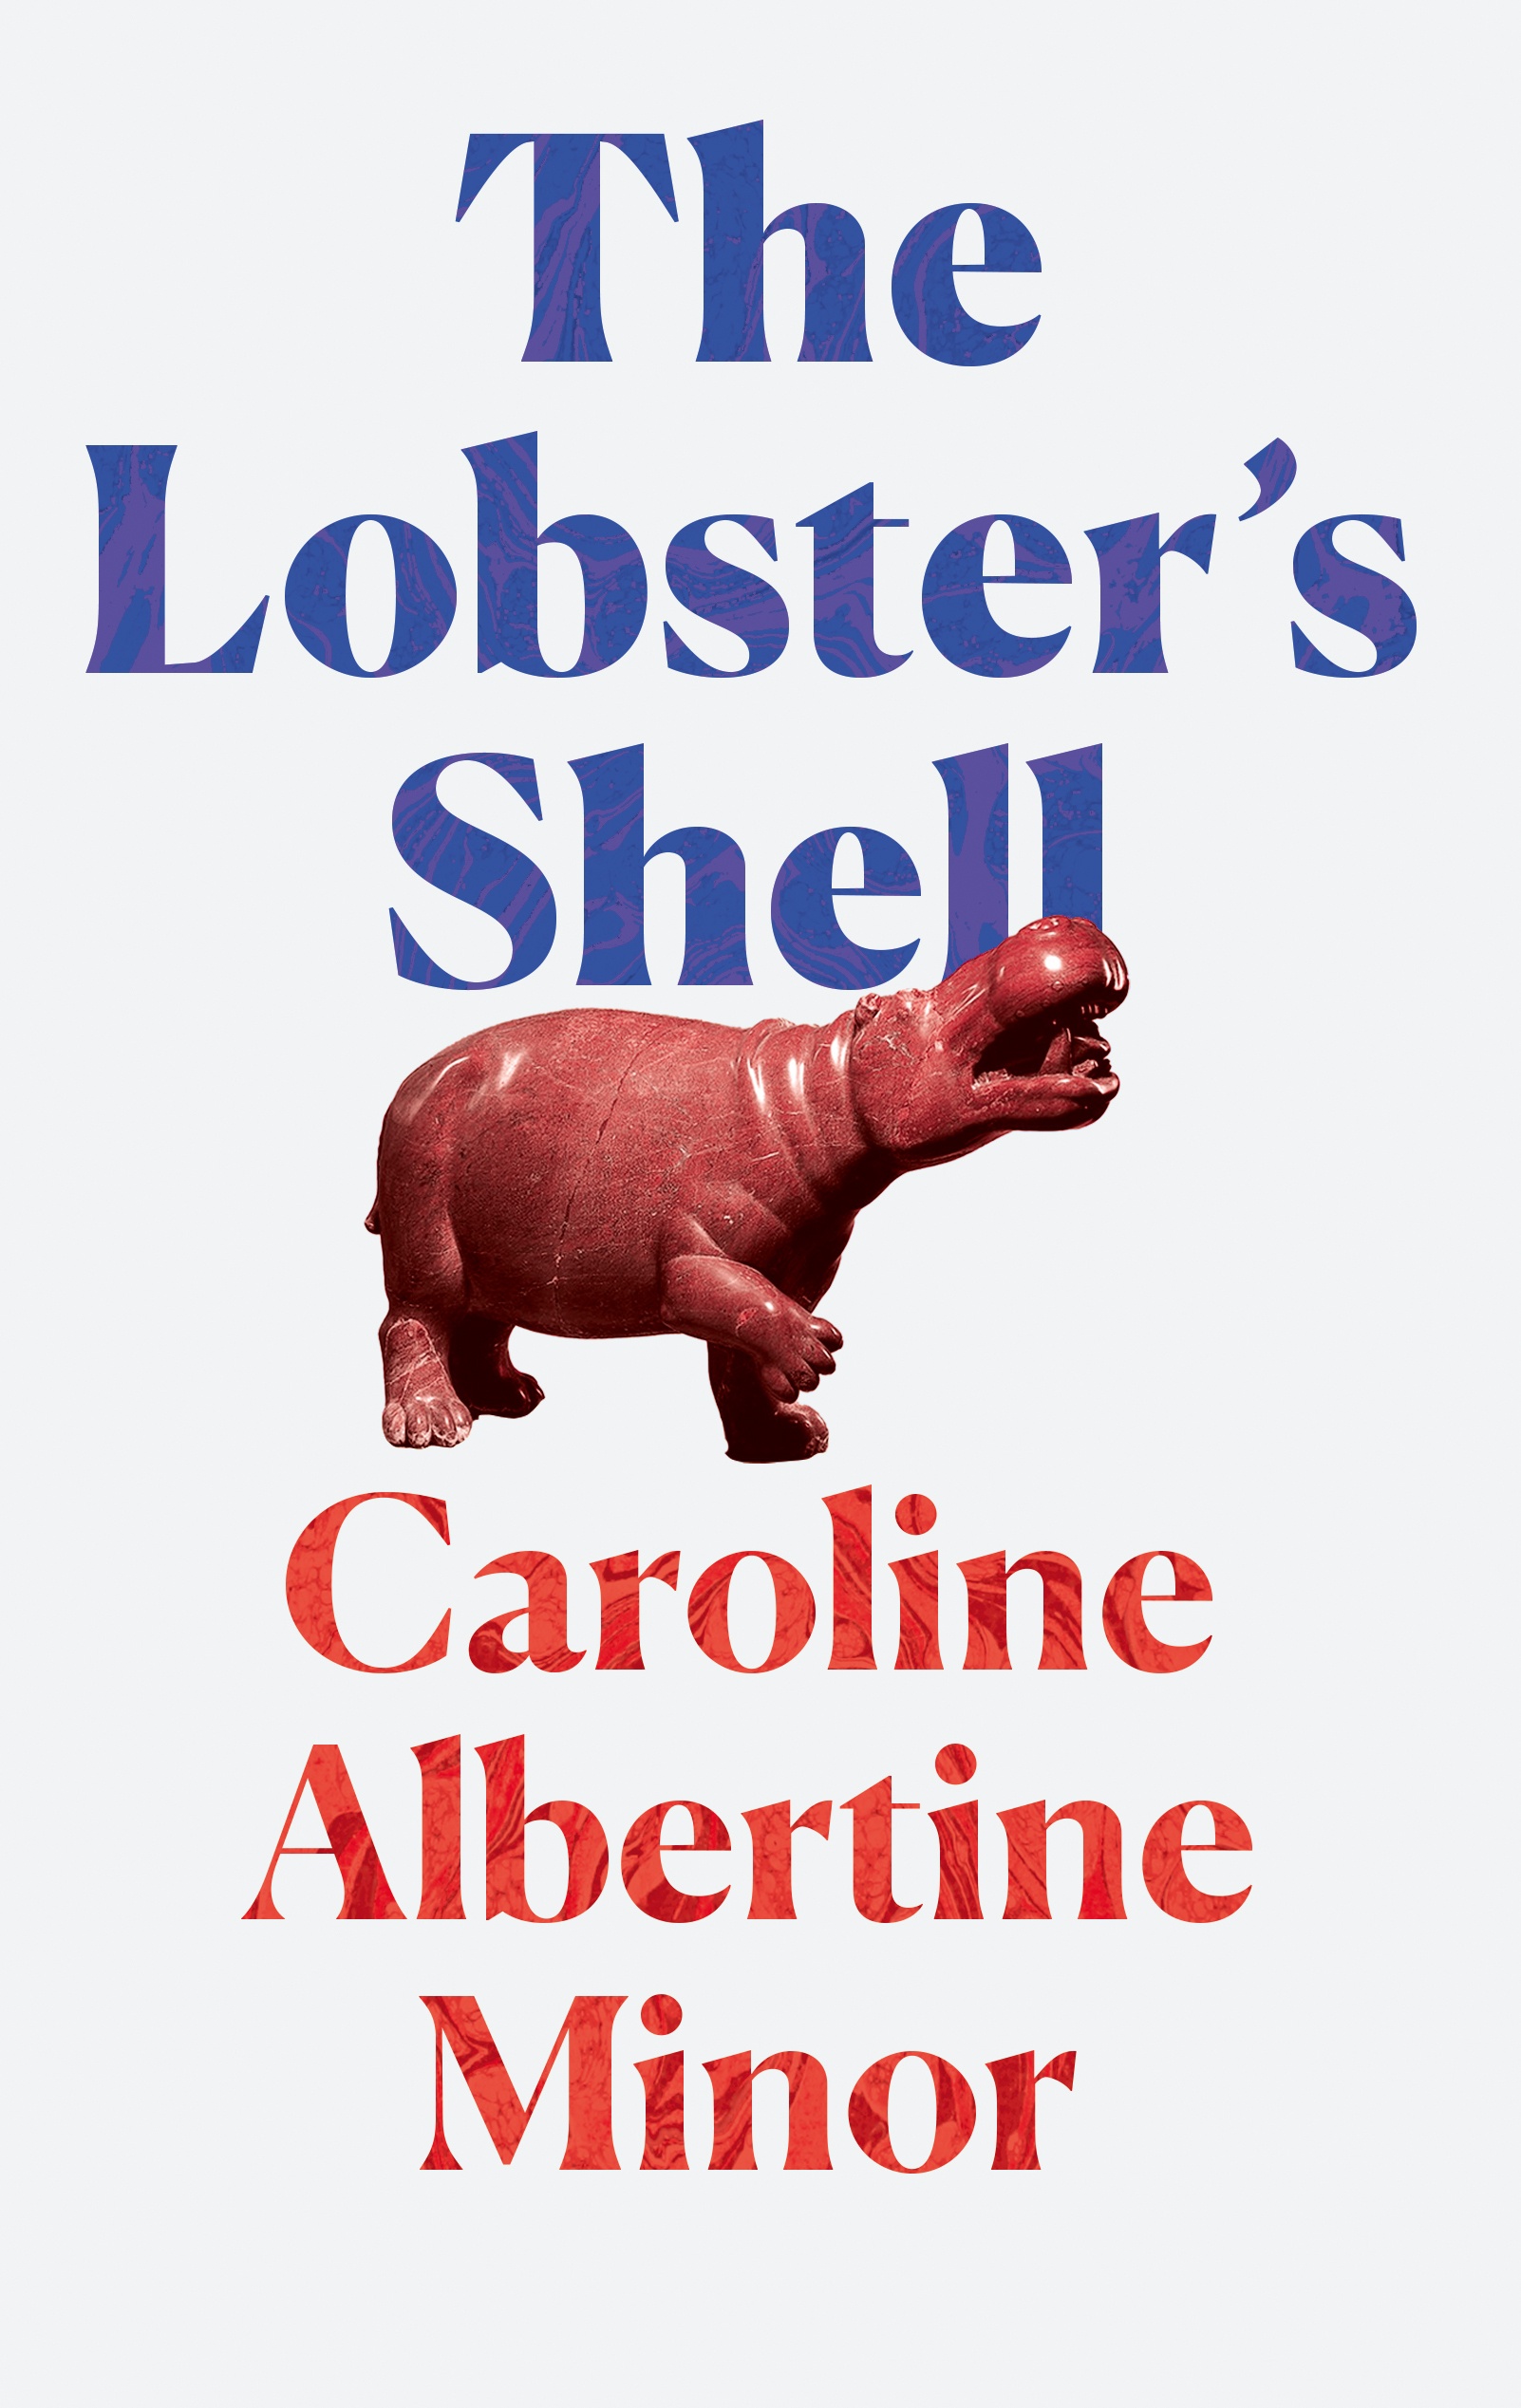 The Lobster's Shell